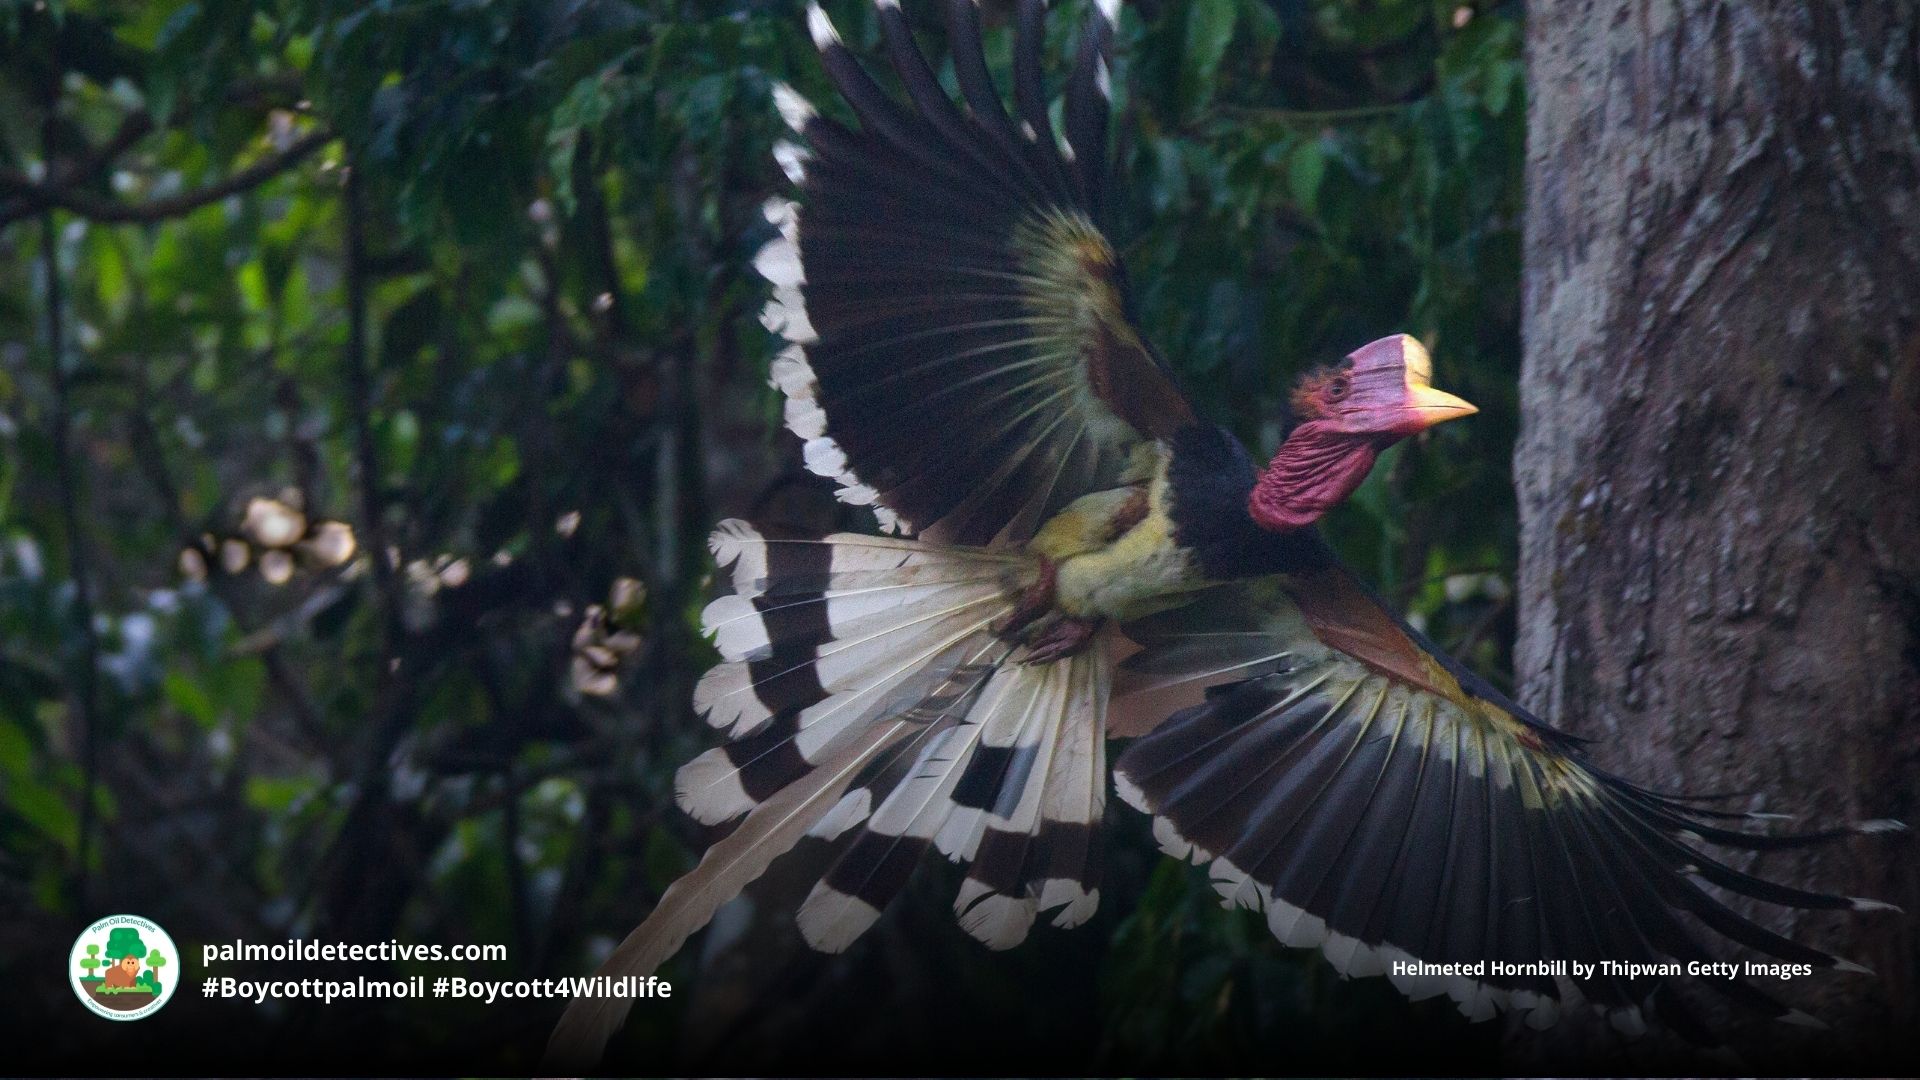 Helmeted Hornbill by Thipwan Getty Images (2)